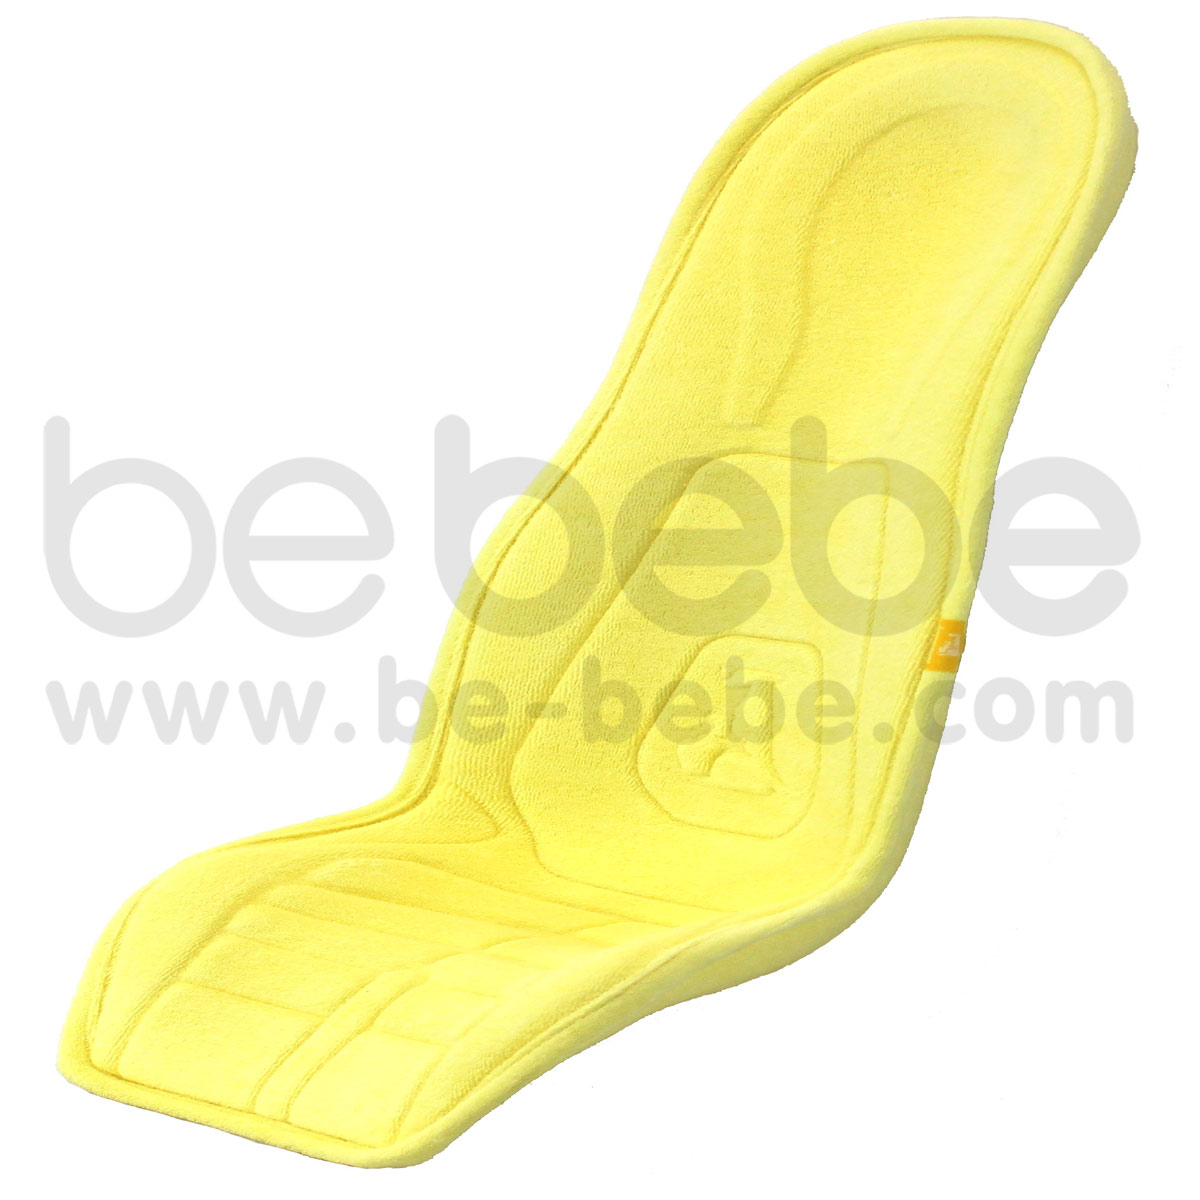 Momby : Momby Baby Support - Yellow